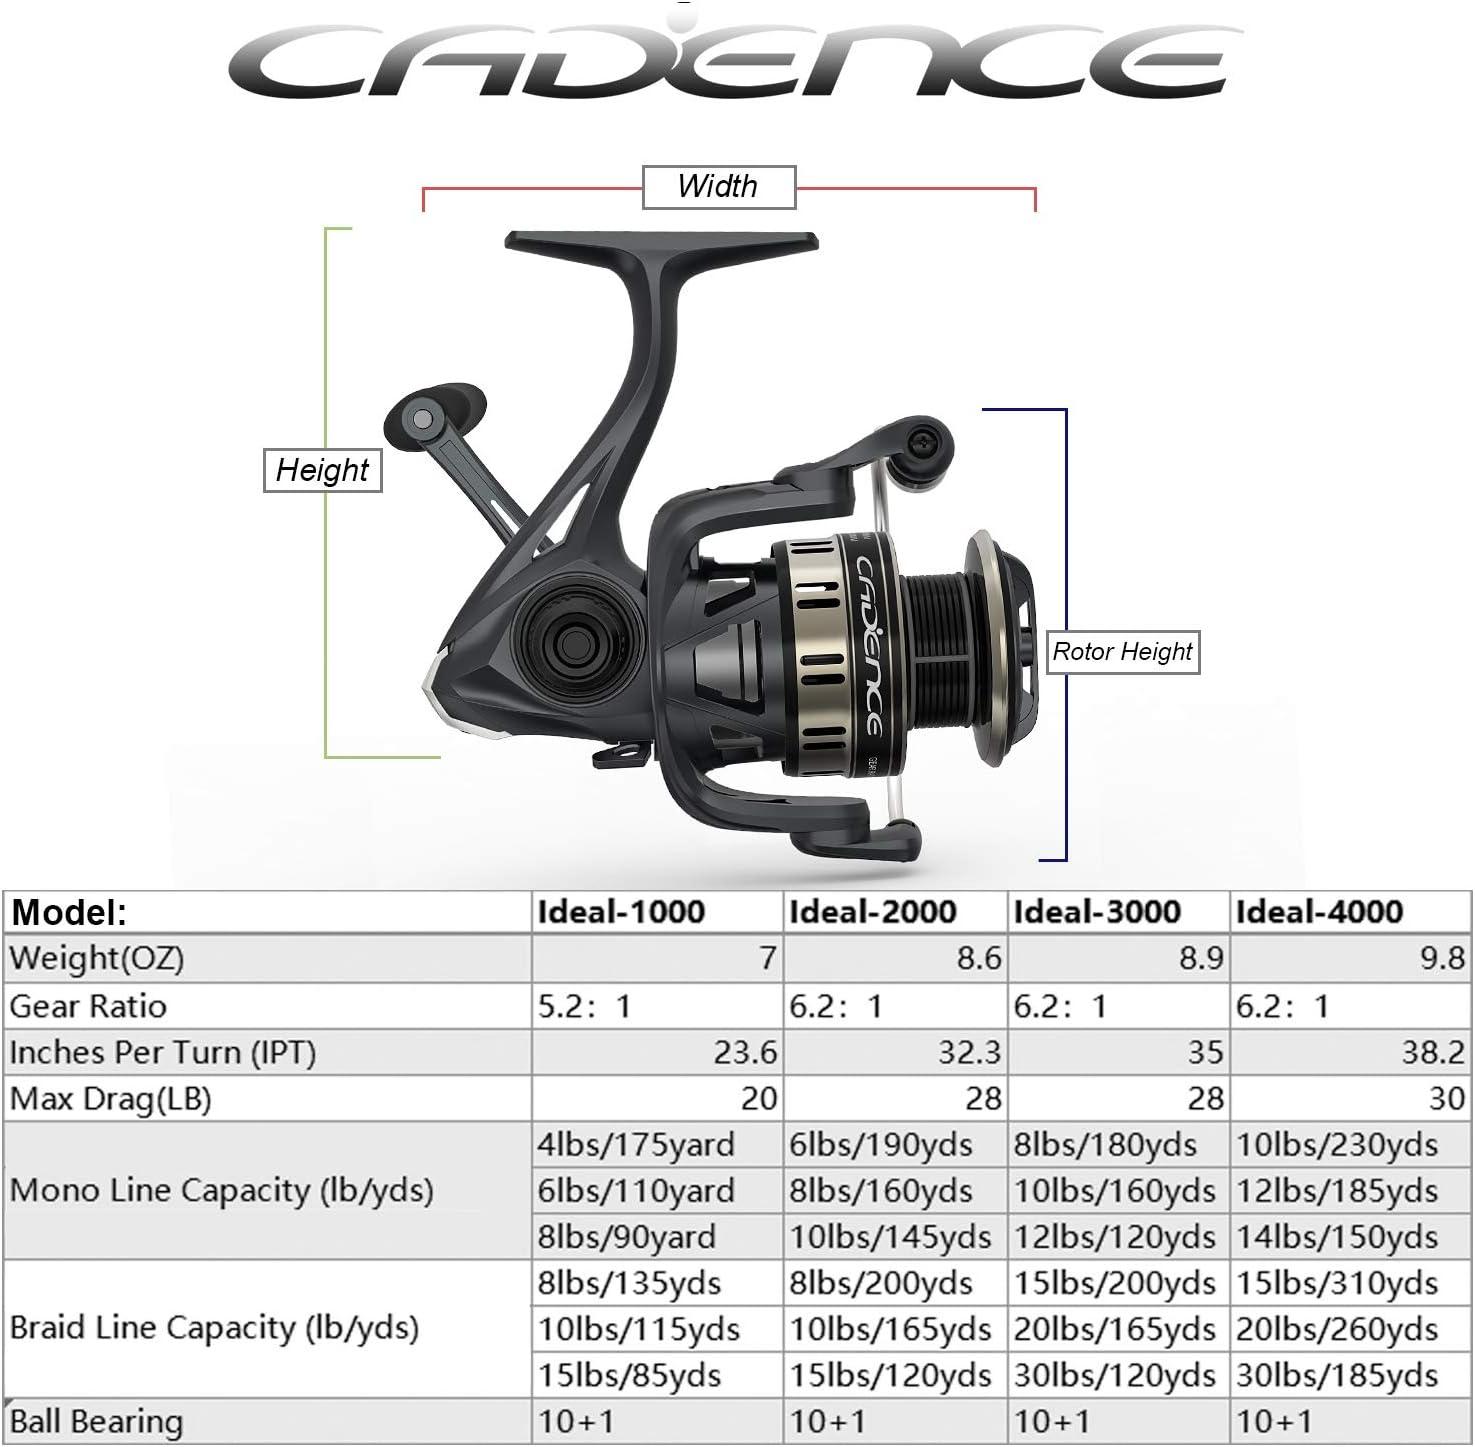 Strong Full Metal Body, Super Smooth Fishing Reel with 10 BB